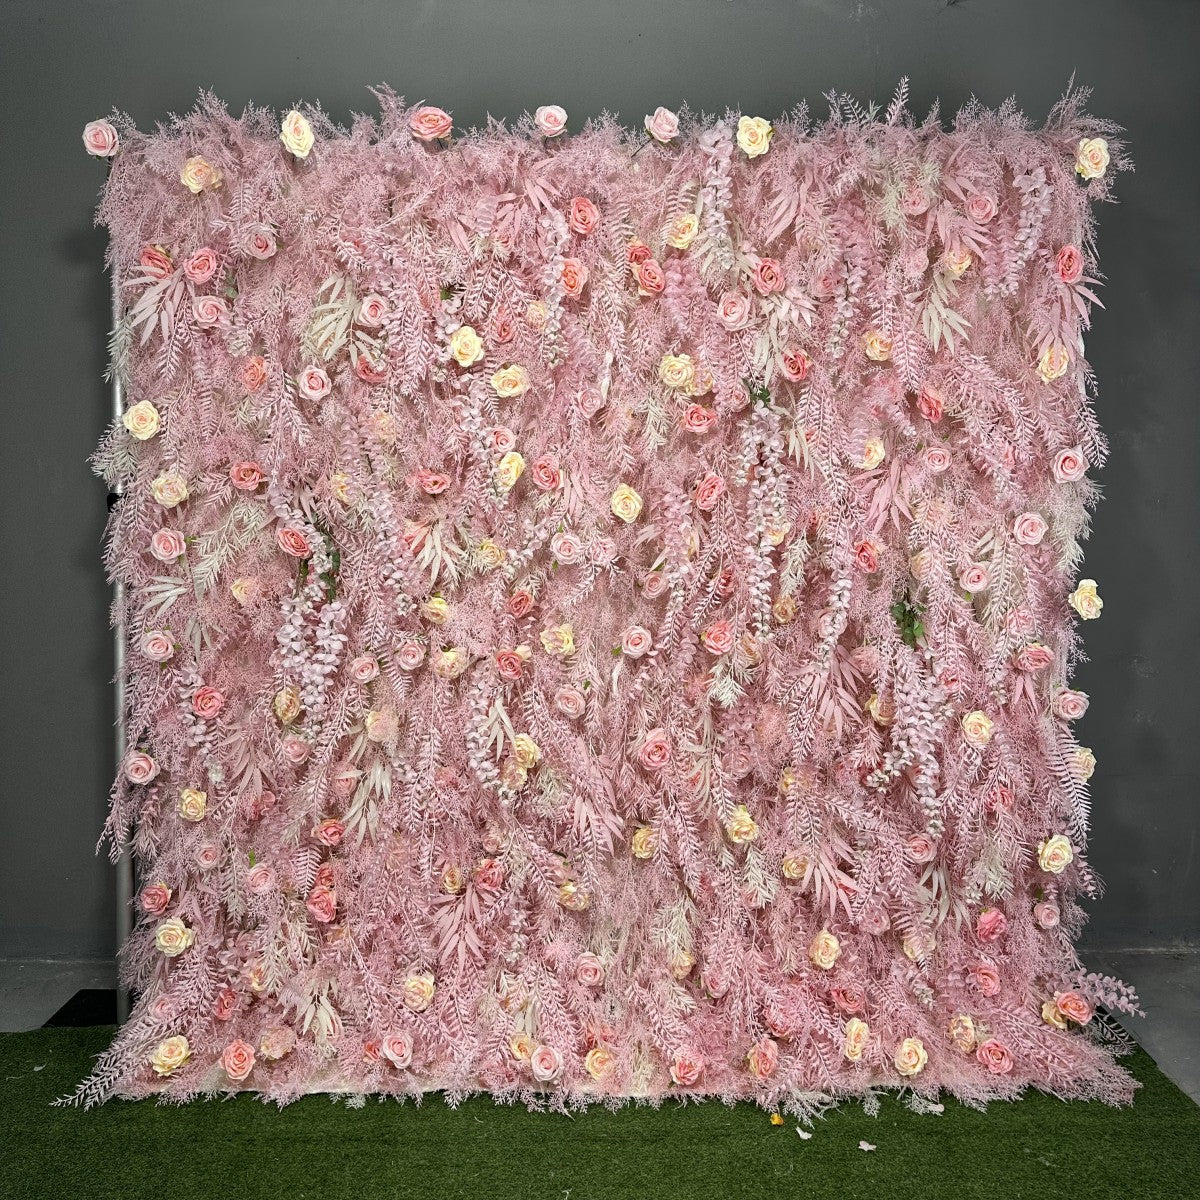 Flower Wall Pink Rolling Up Curtain Floral Backdrop Wedding Party Proposal Decor